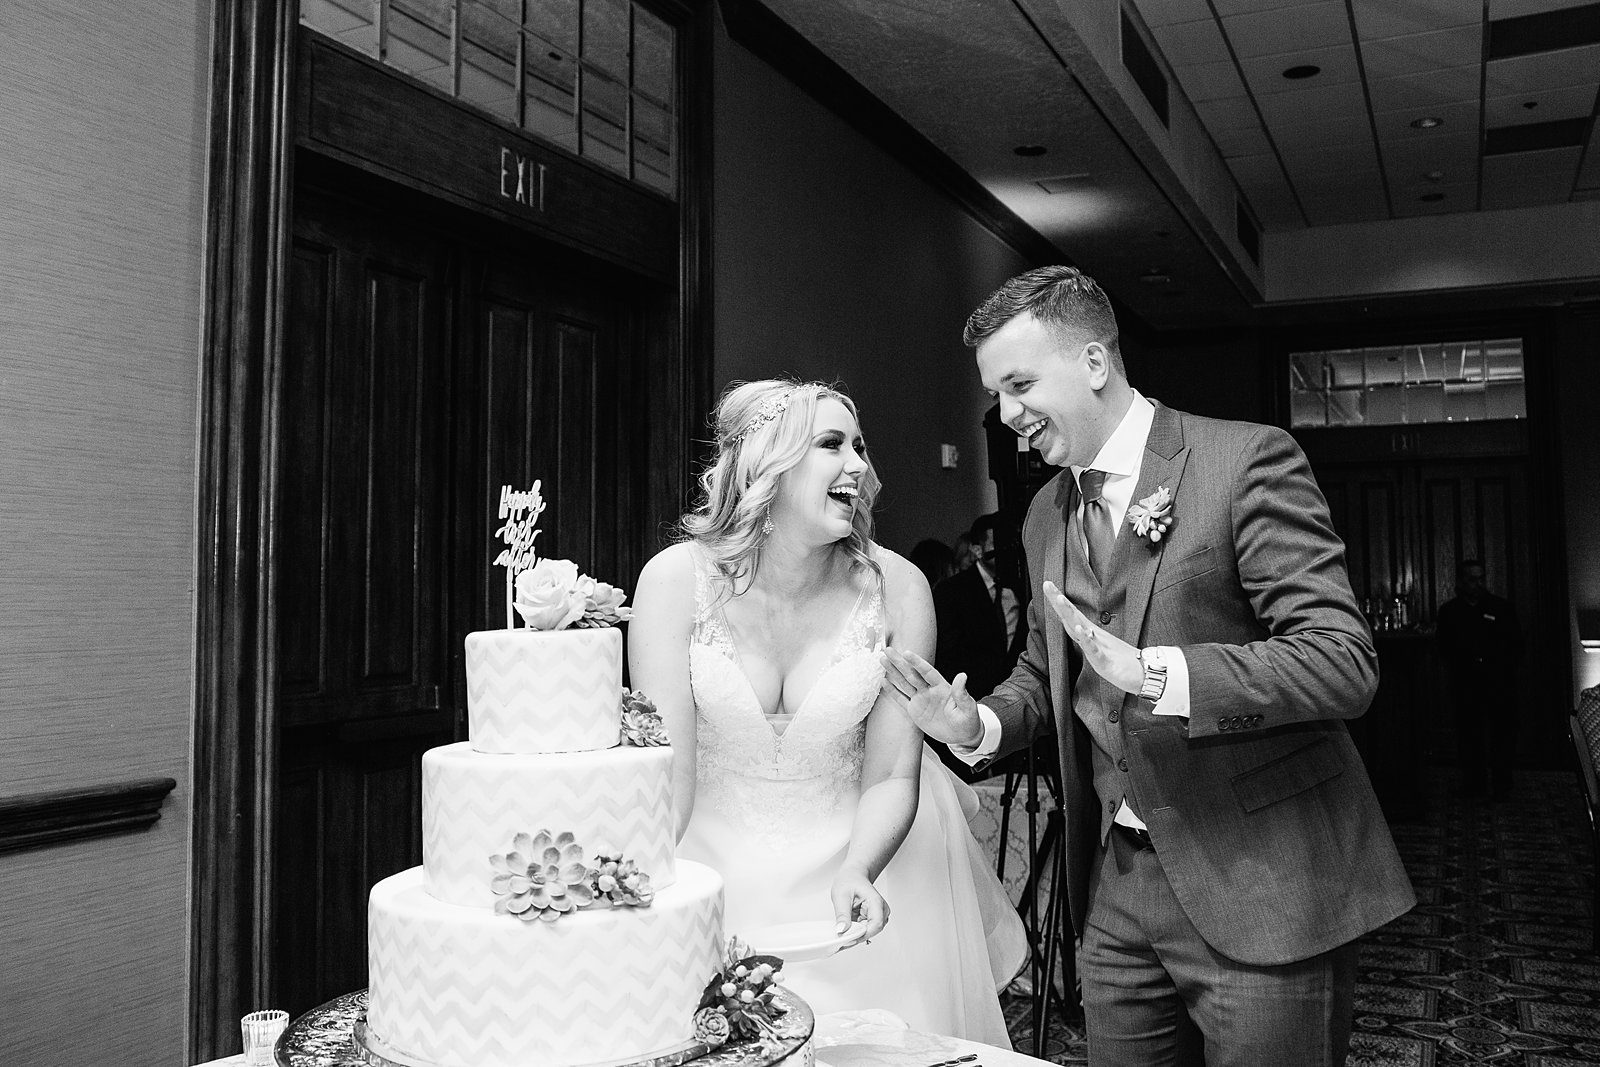 Bride and Groom cutting their wedding cake at their The Scottsdale Resort at McCormick Ranch wedding reception by Arizona wedding photographer PMA Photography.